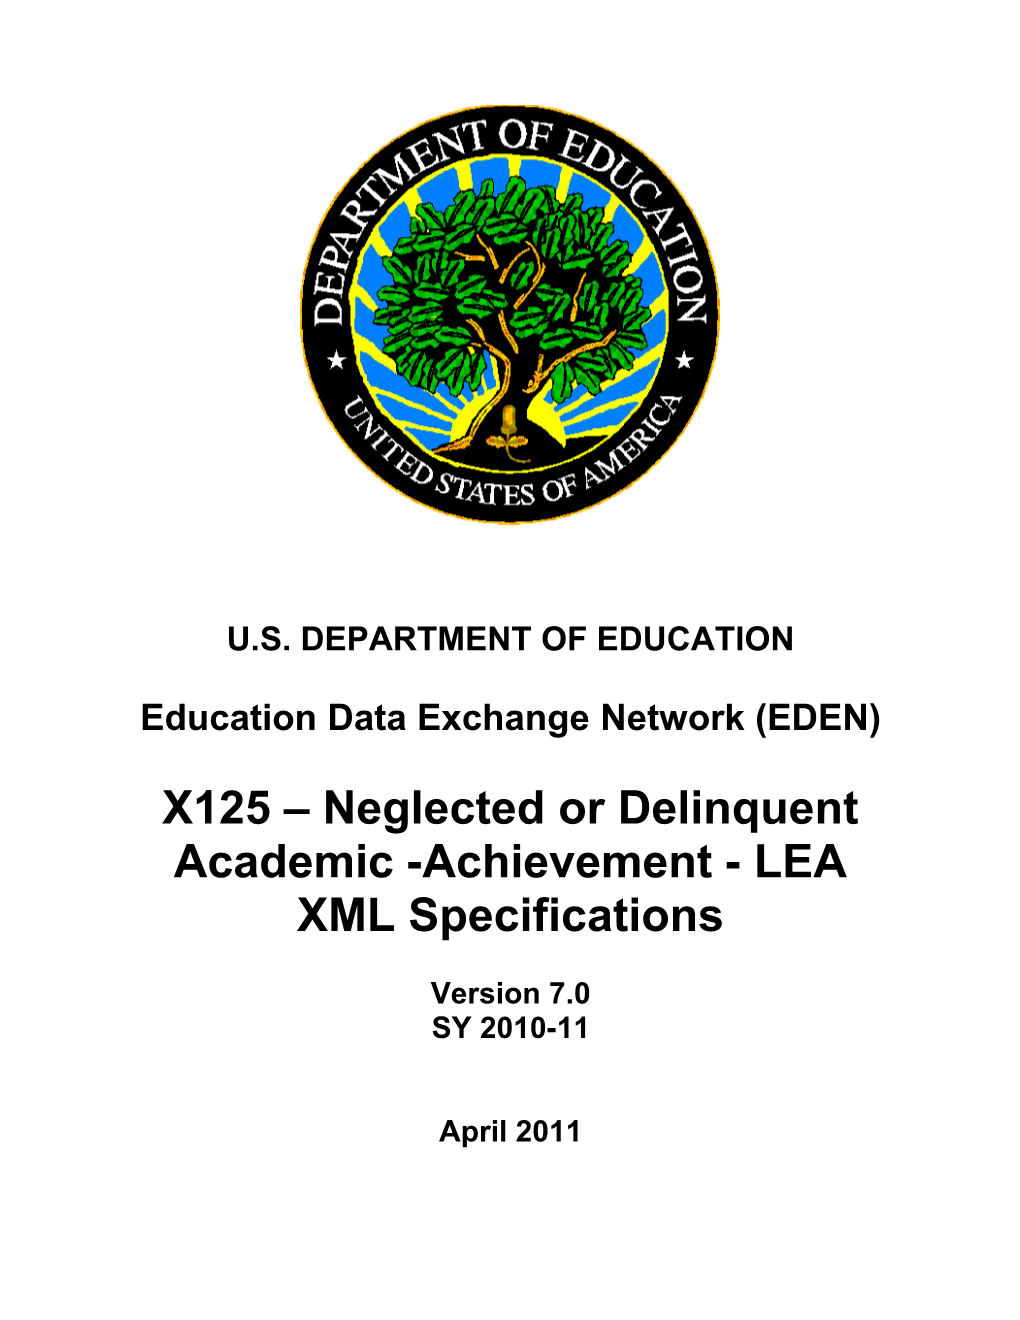 Neglected Or Delinquent Academic Achievement - LEA XML Specifications